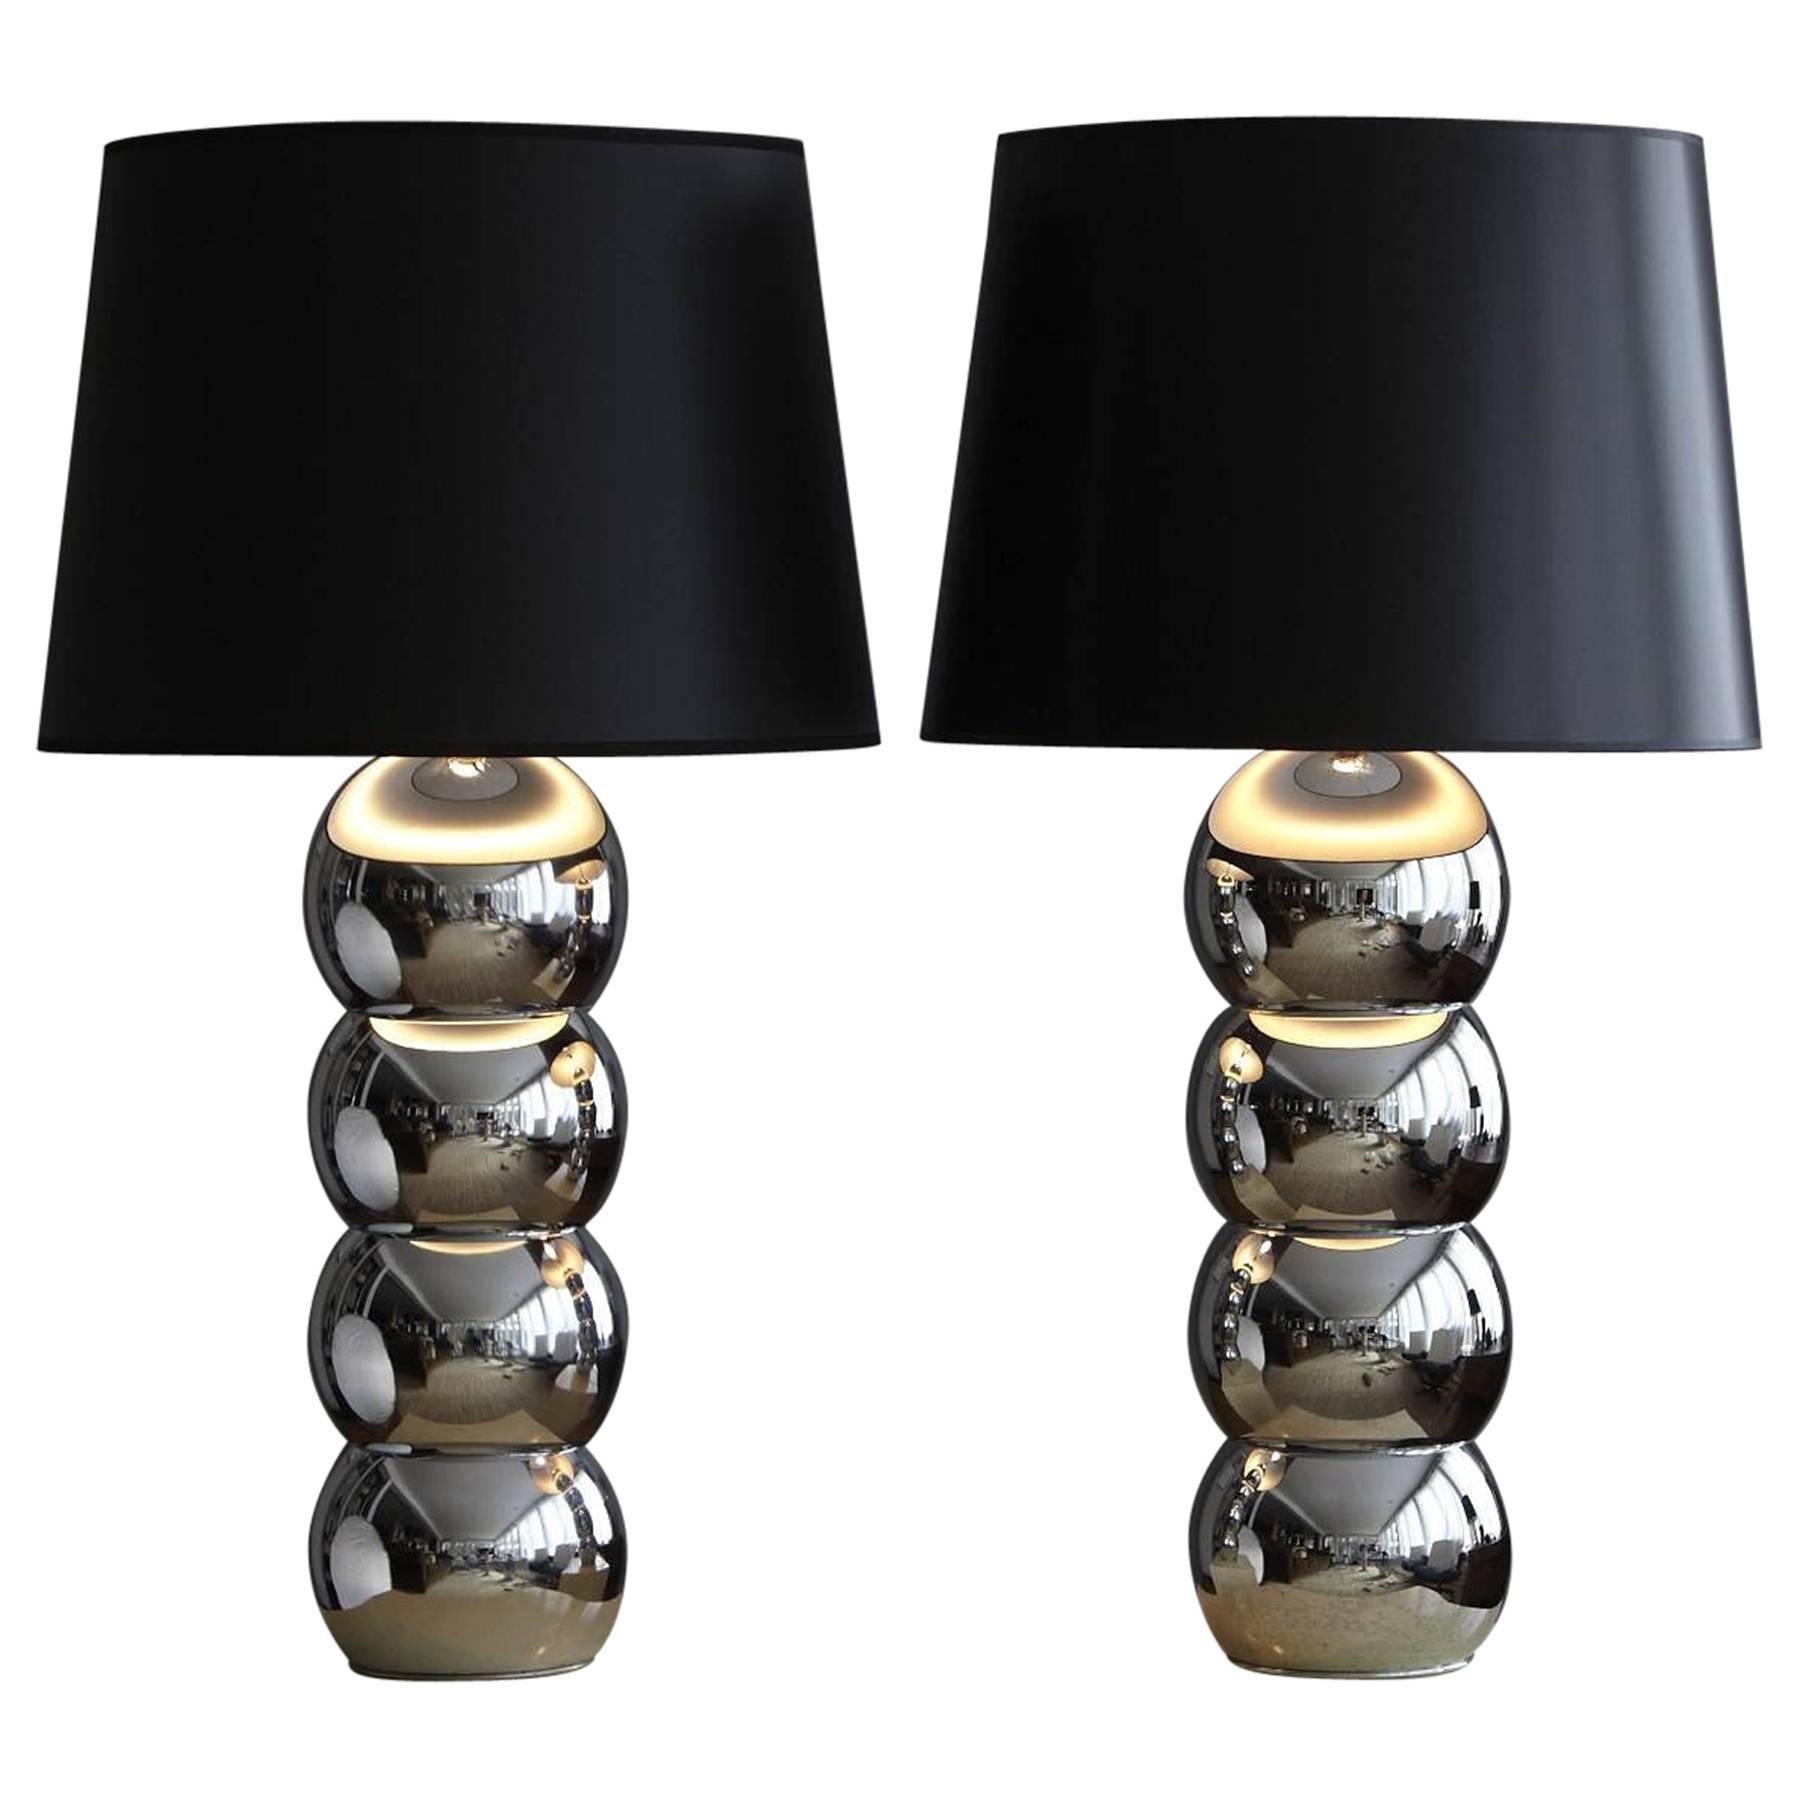 Pair of George Kovacs Stacked Chrome Ball Table Lamps